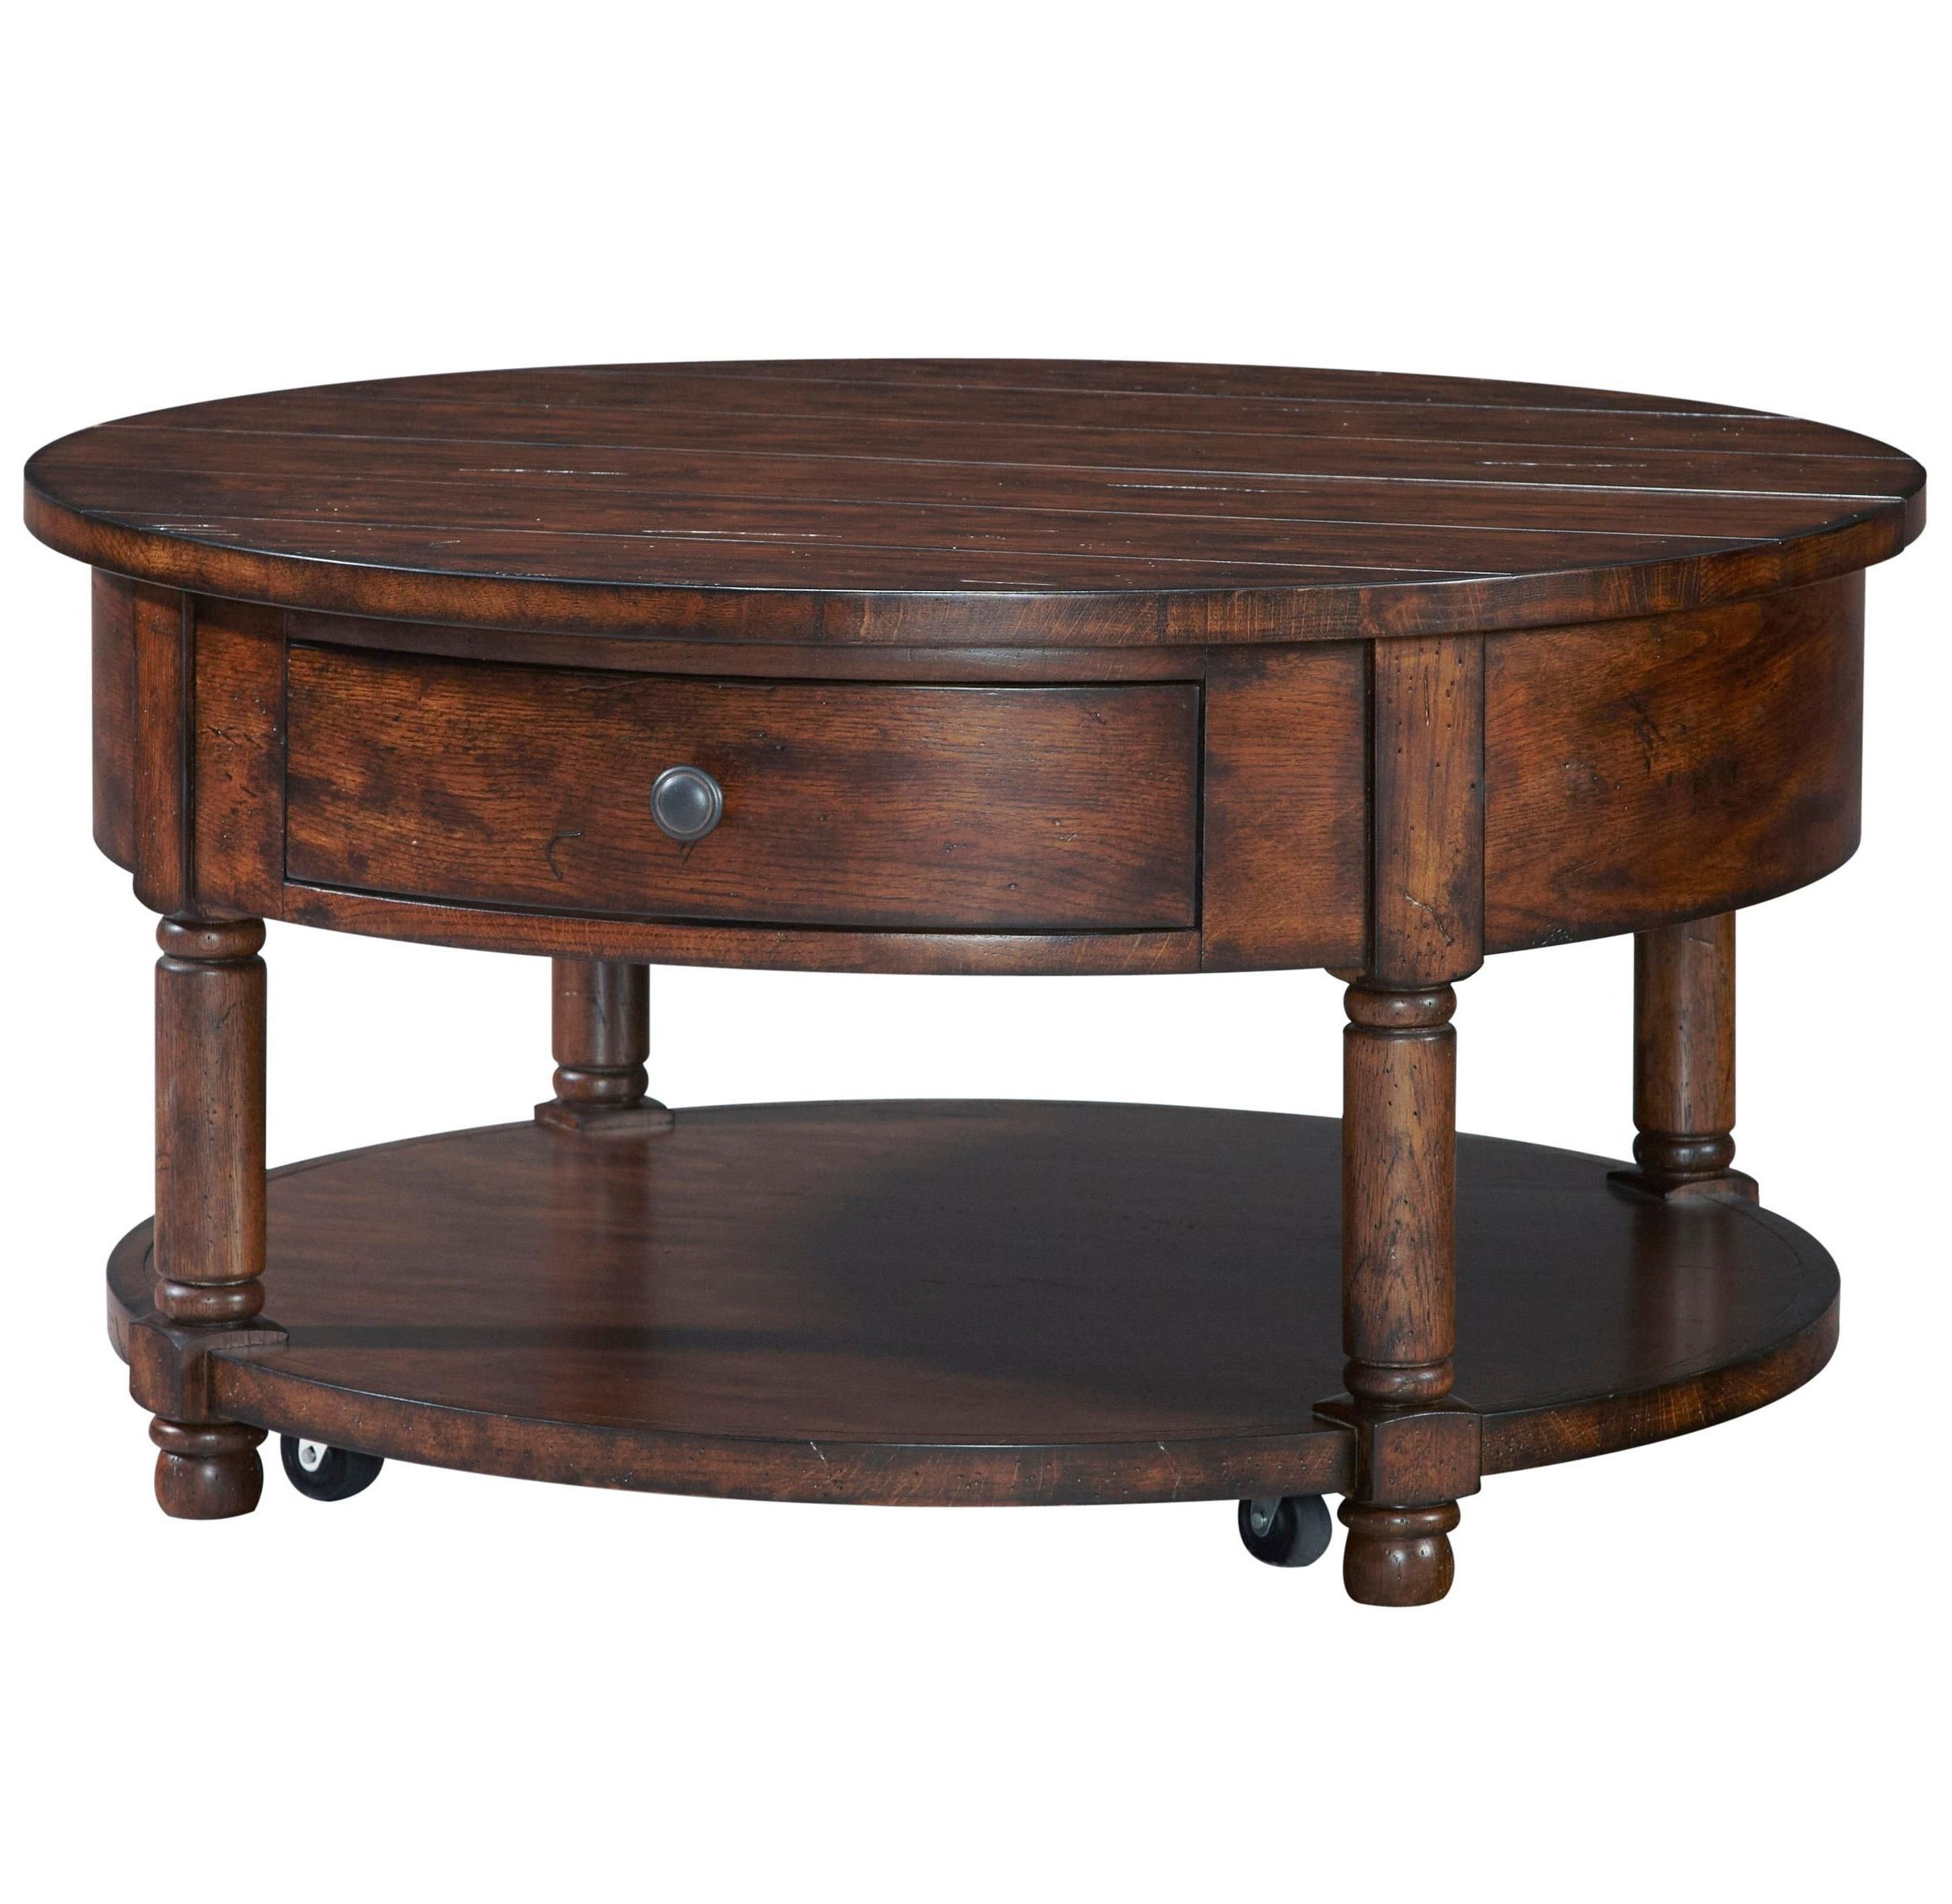 2018 Grant Lift Top Cocktail Tables With Casters Intended For Attic Heirlooms Round Lift Top Cocktail Tablebroyhill Furniture (View 3 of 20)